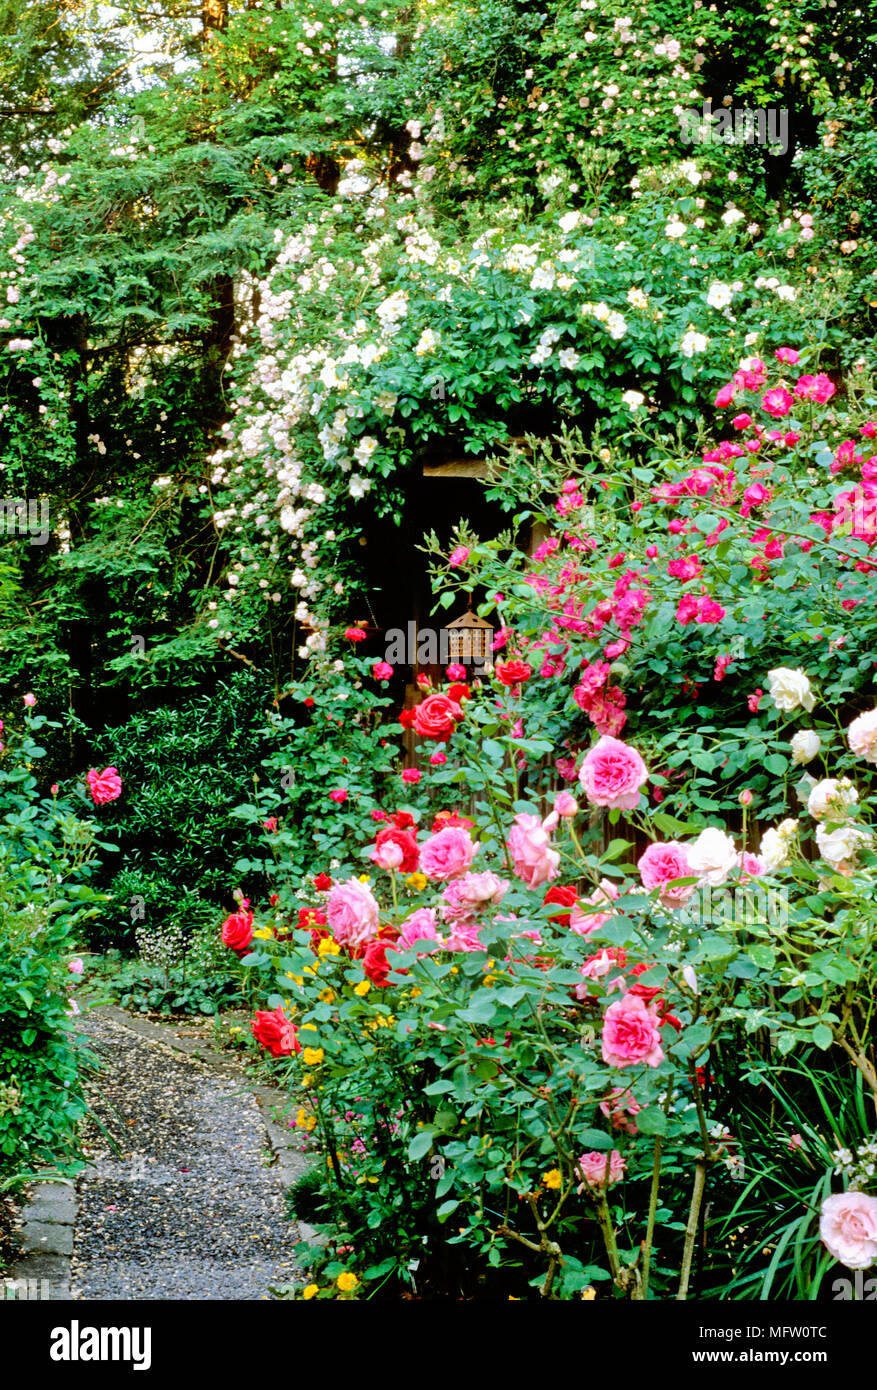 Garden with a planting of Rosa ÔVanityÕ over the fence, Rosa ÔSally HolmesÕ on arbour, Rosa ÔCecile BrunnerÕ on arbour and pink Rosa ÔBriarcliffÕ Stock Photo